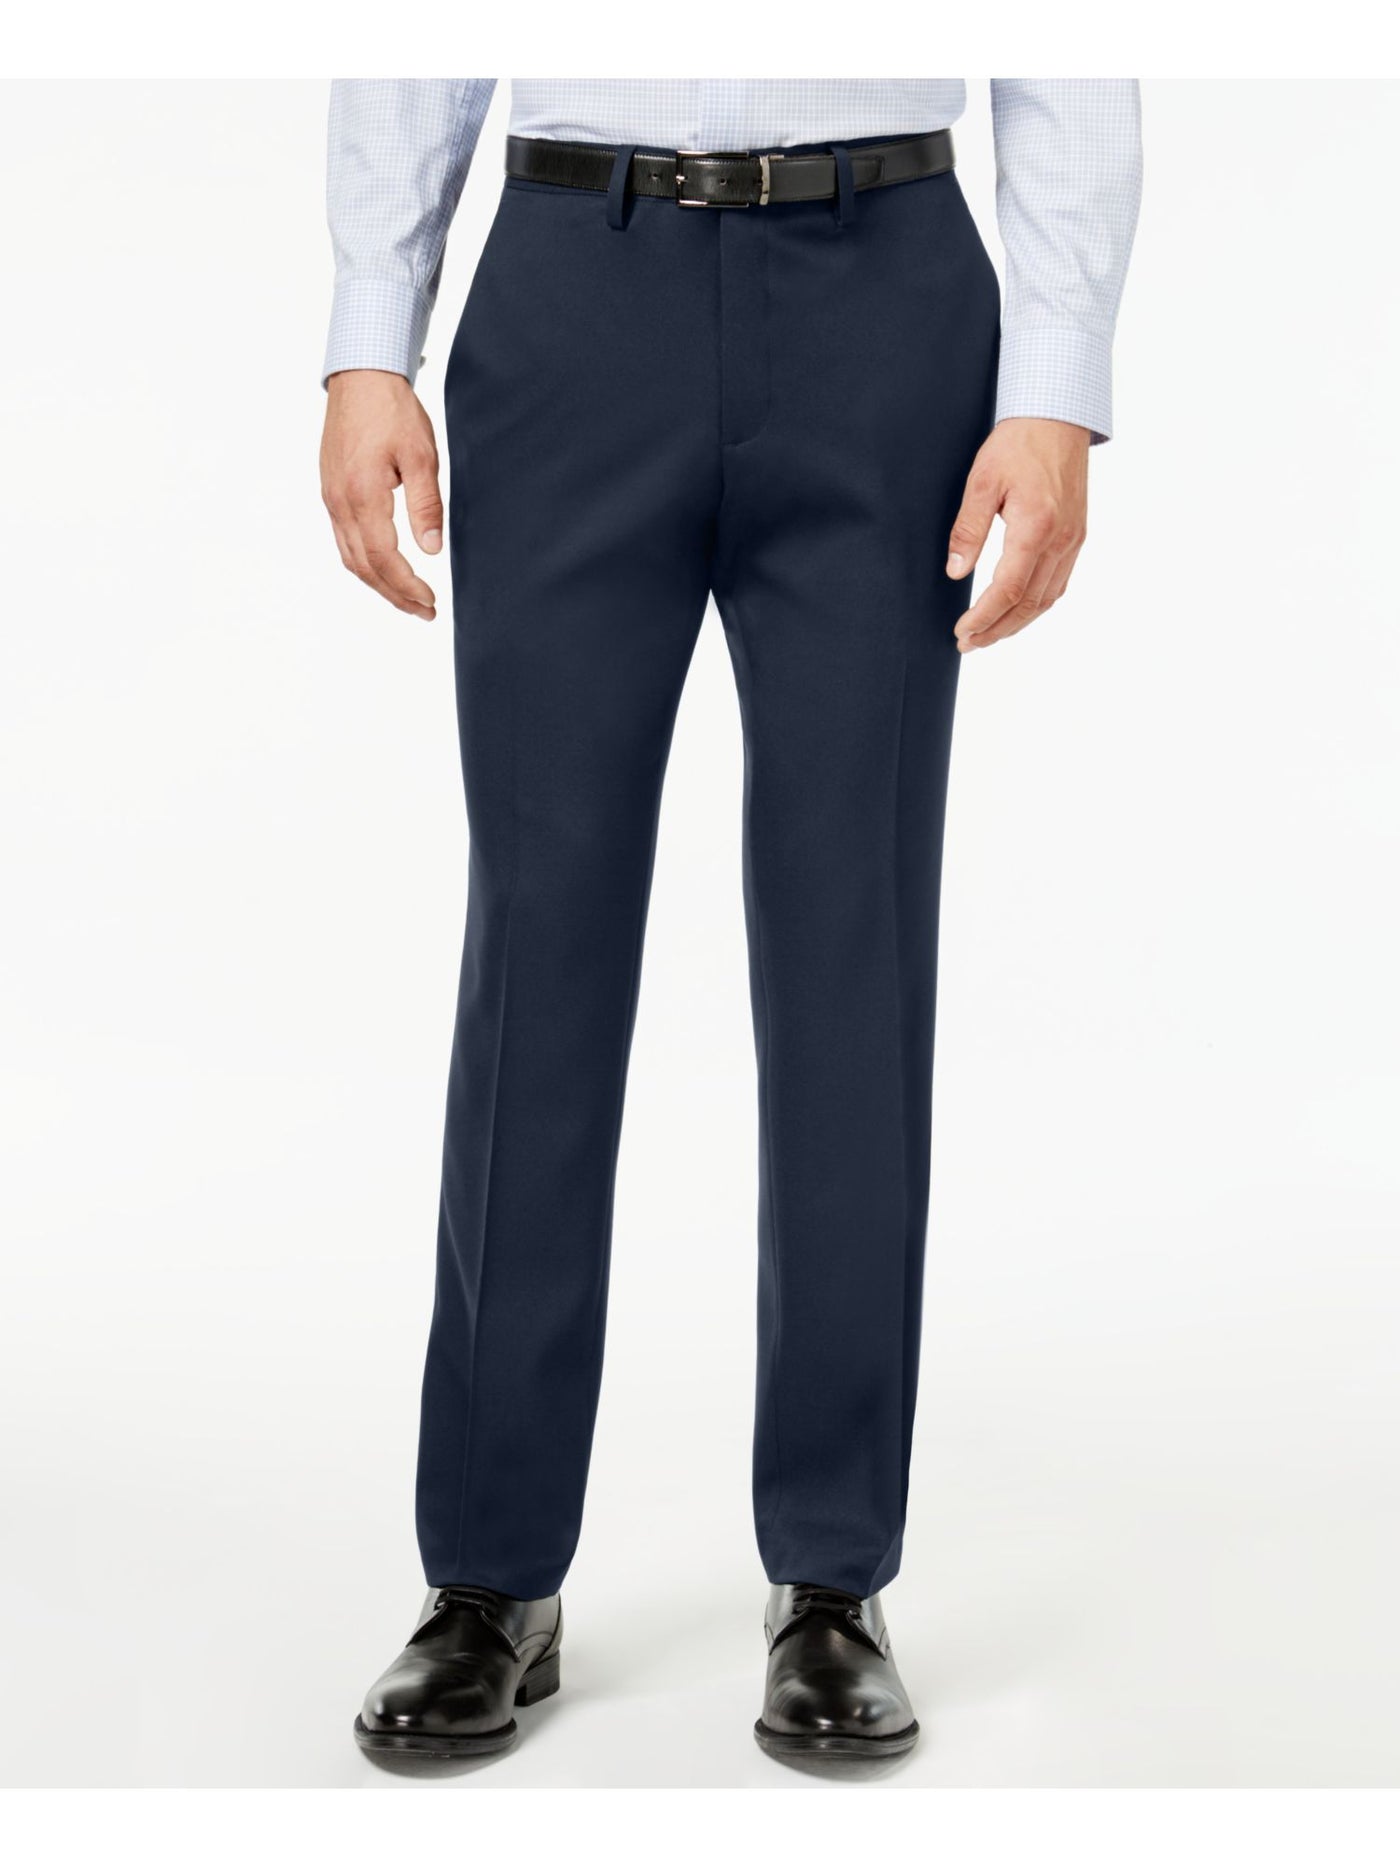 REACTION KENNETH COLE Mens Navy Slim Fit Stretch Pants W30/ L30